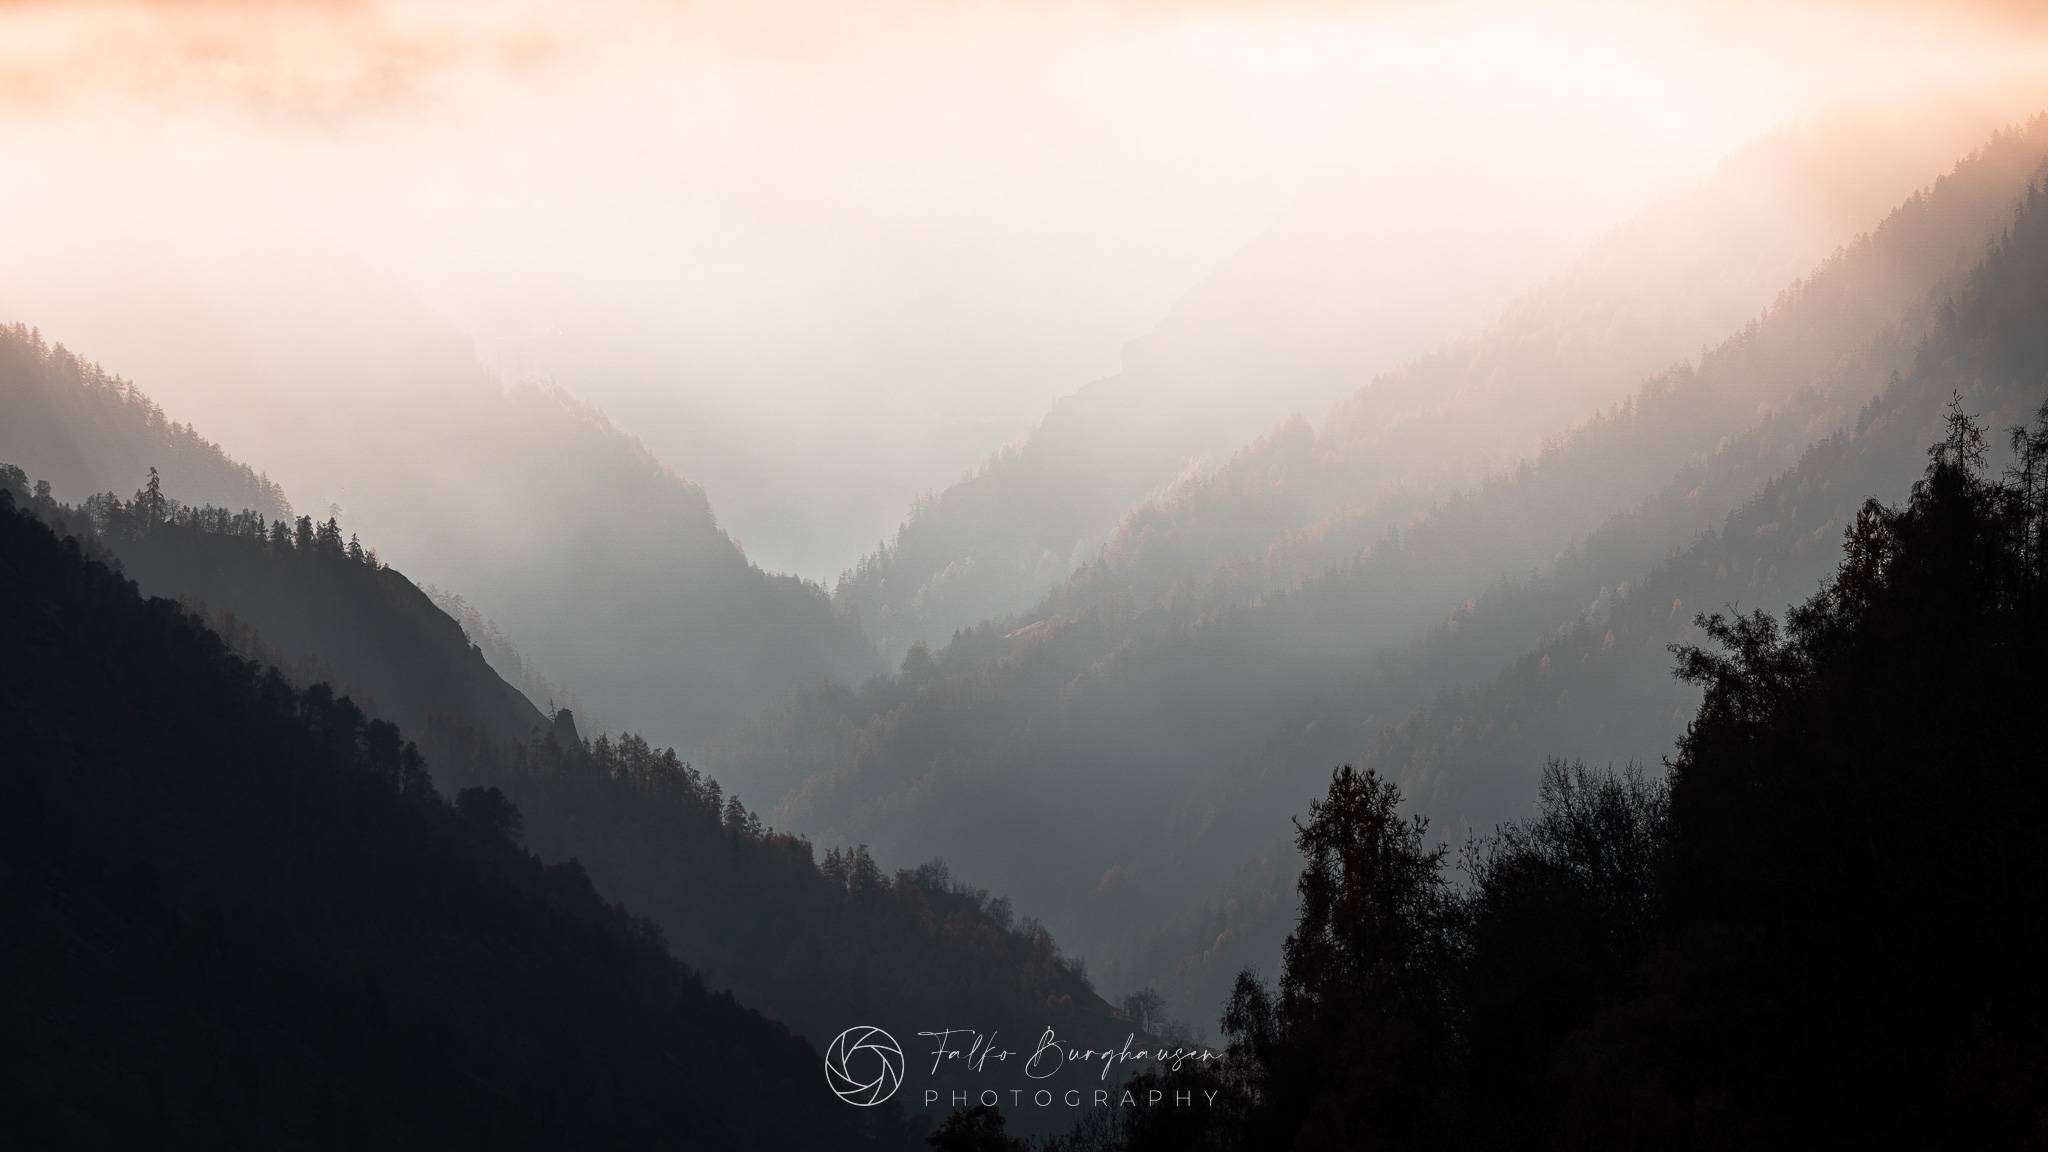 Secrets of the Foggy Mountains